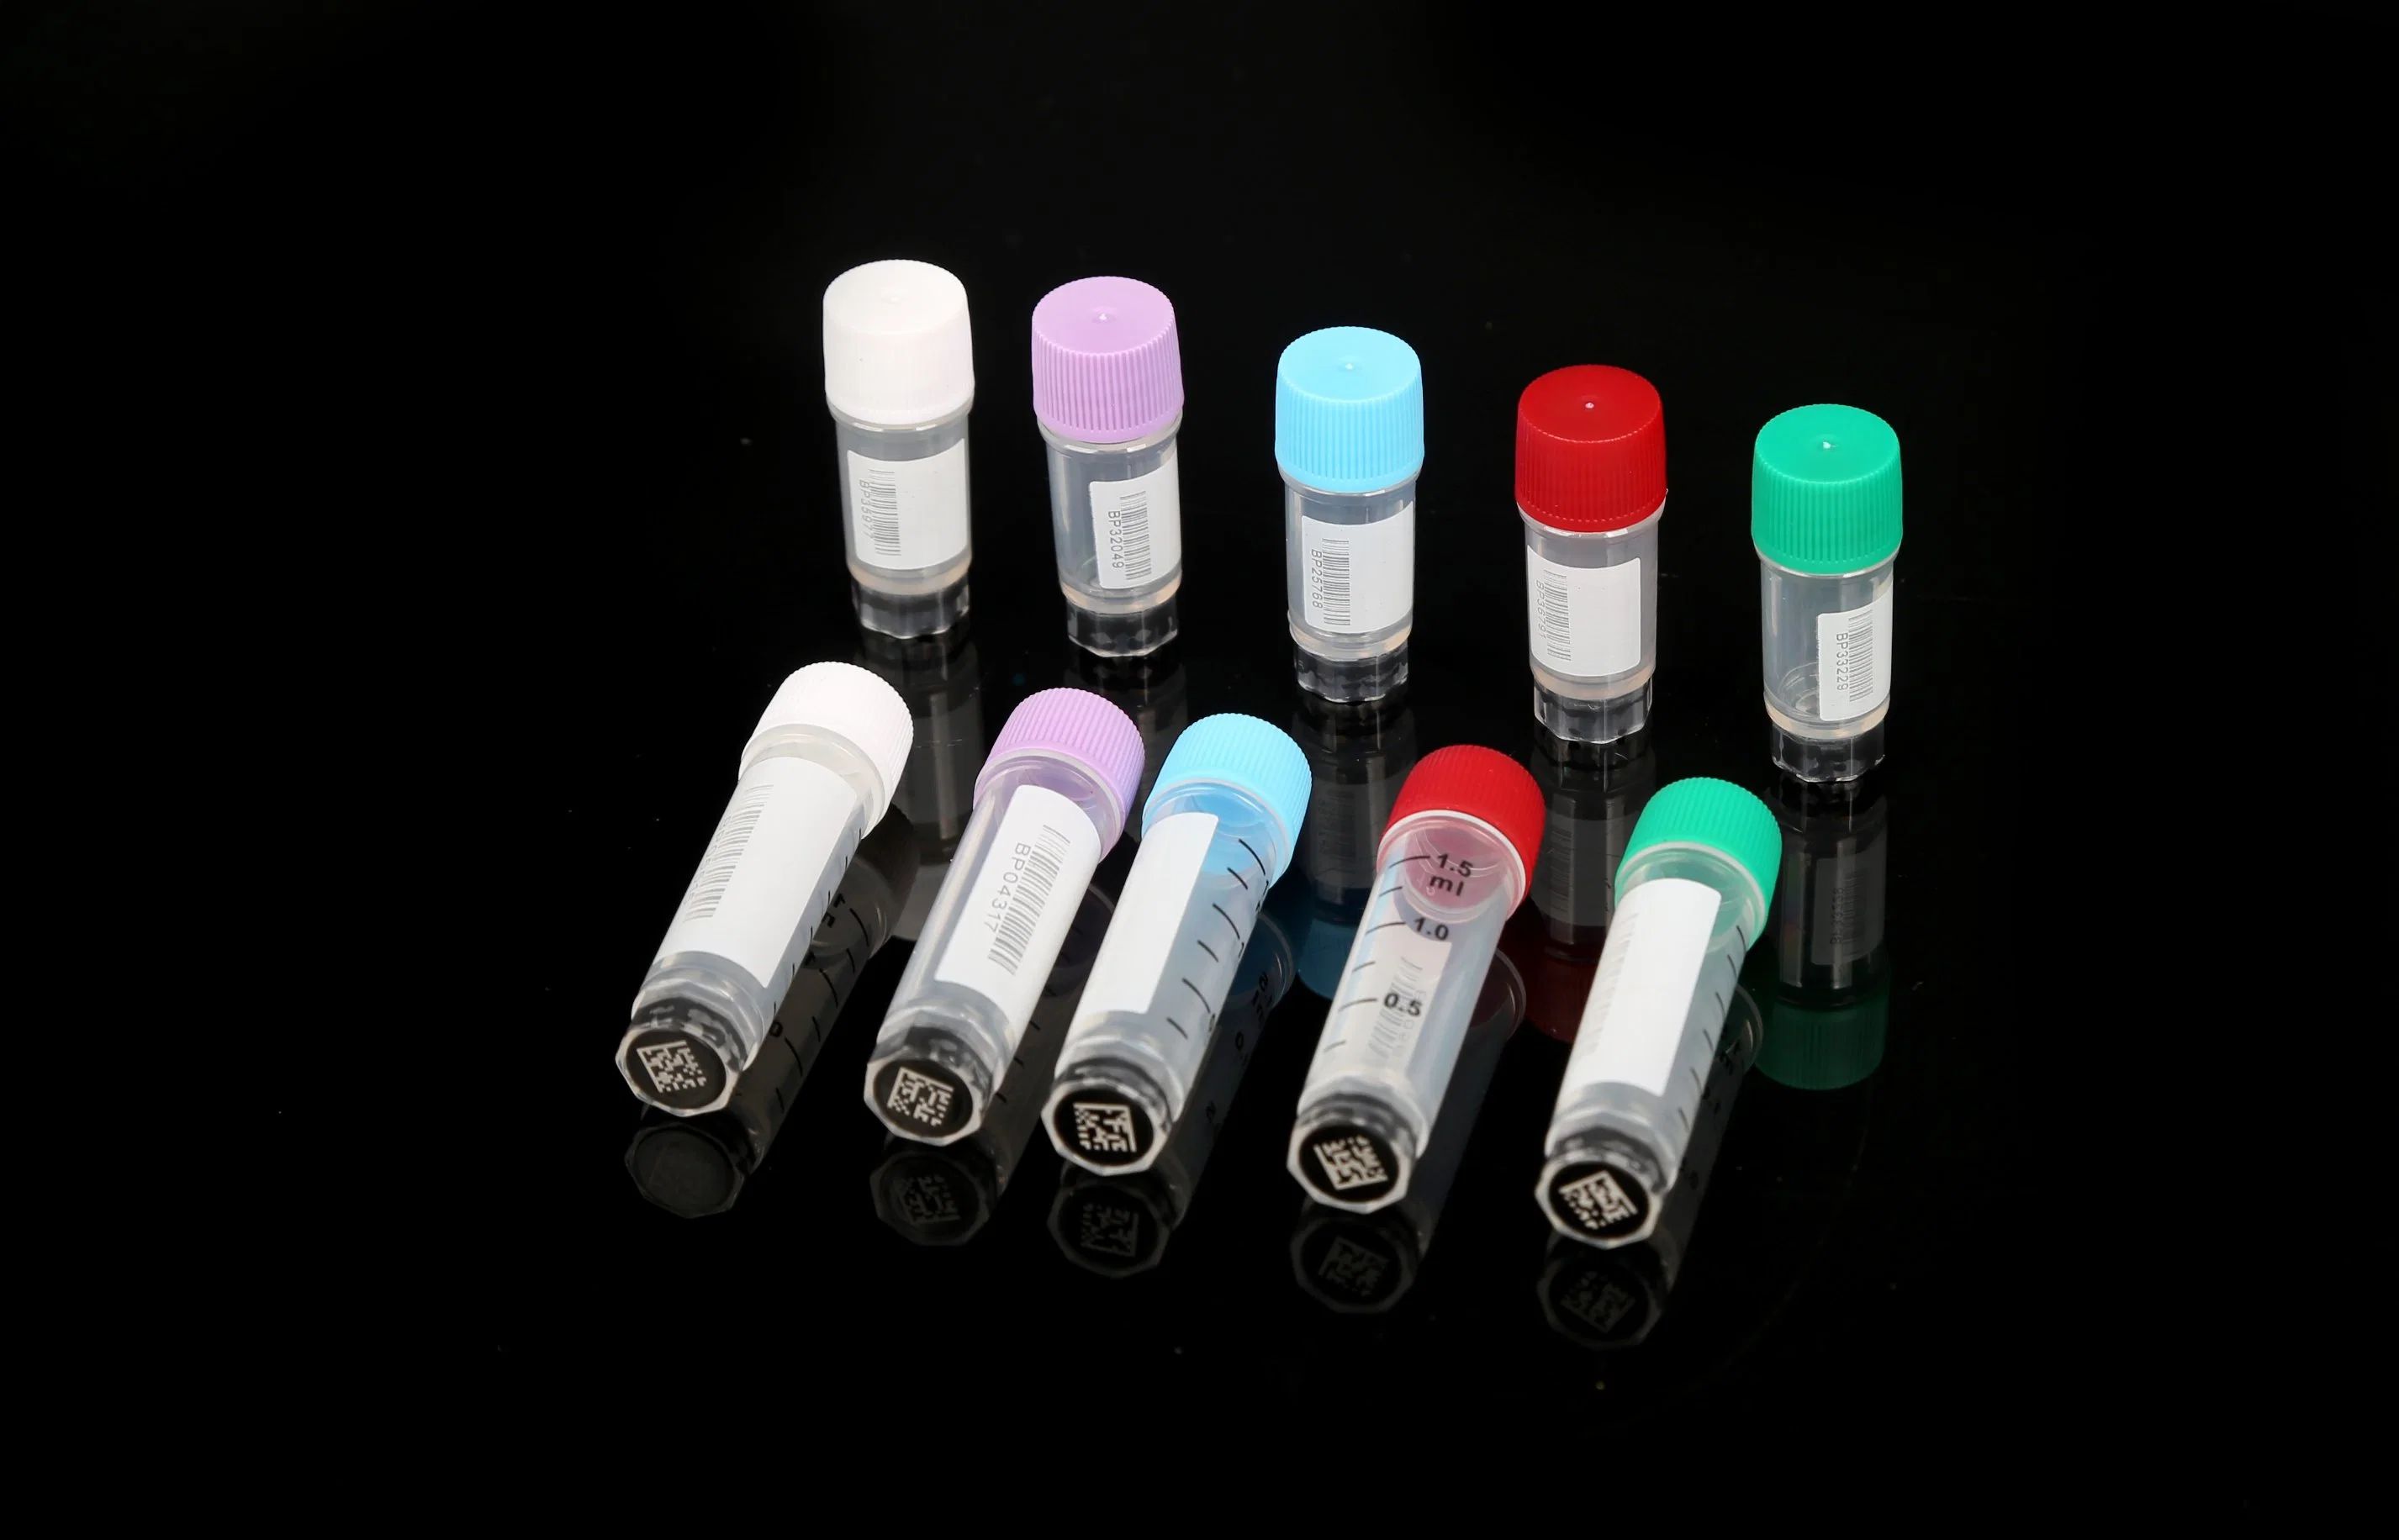 Cryogenic Vials, Sampe Tubes, 1.5ml, Bulk, New Version Tubes, Sterile, CE, ISO Certified 2D Barcode Cryovials